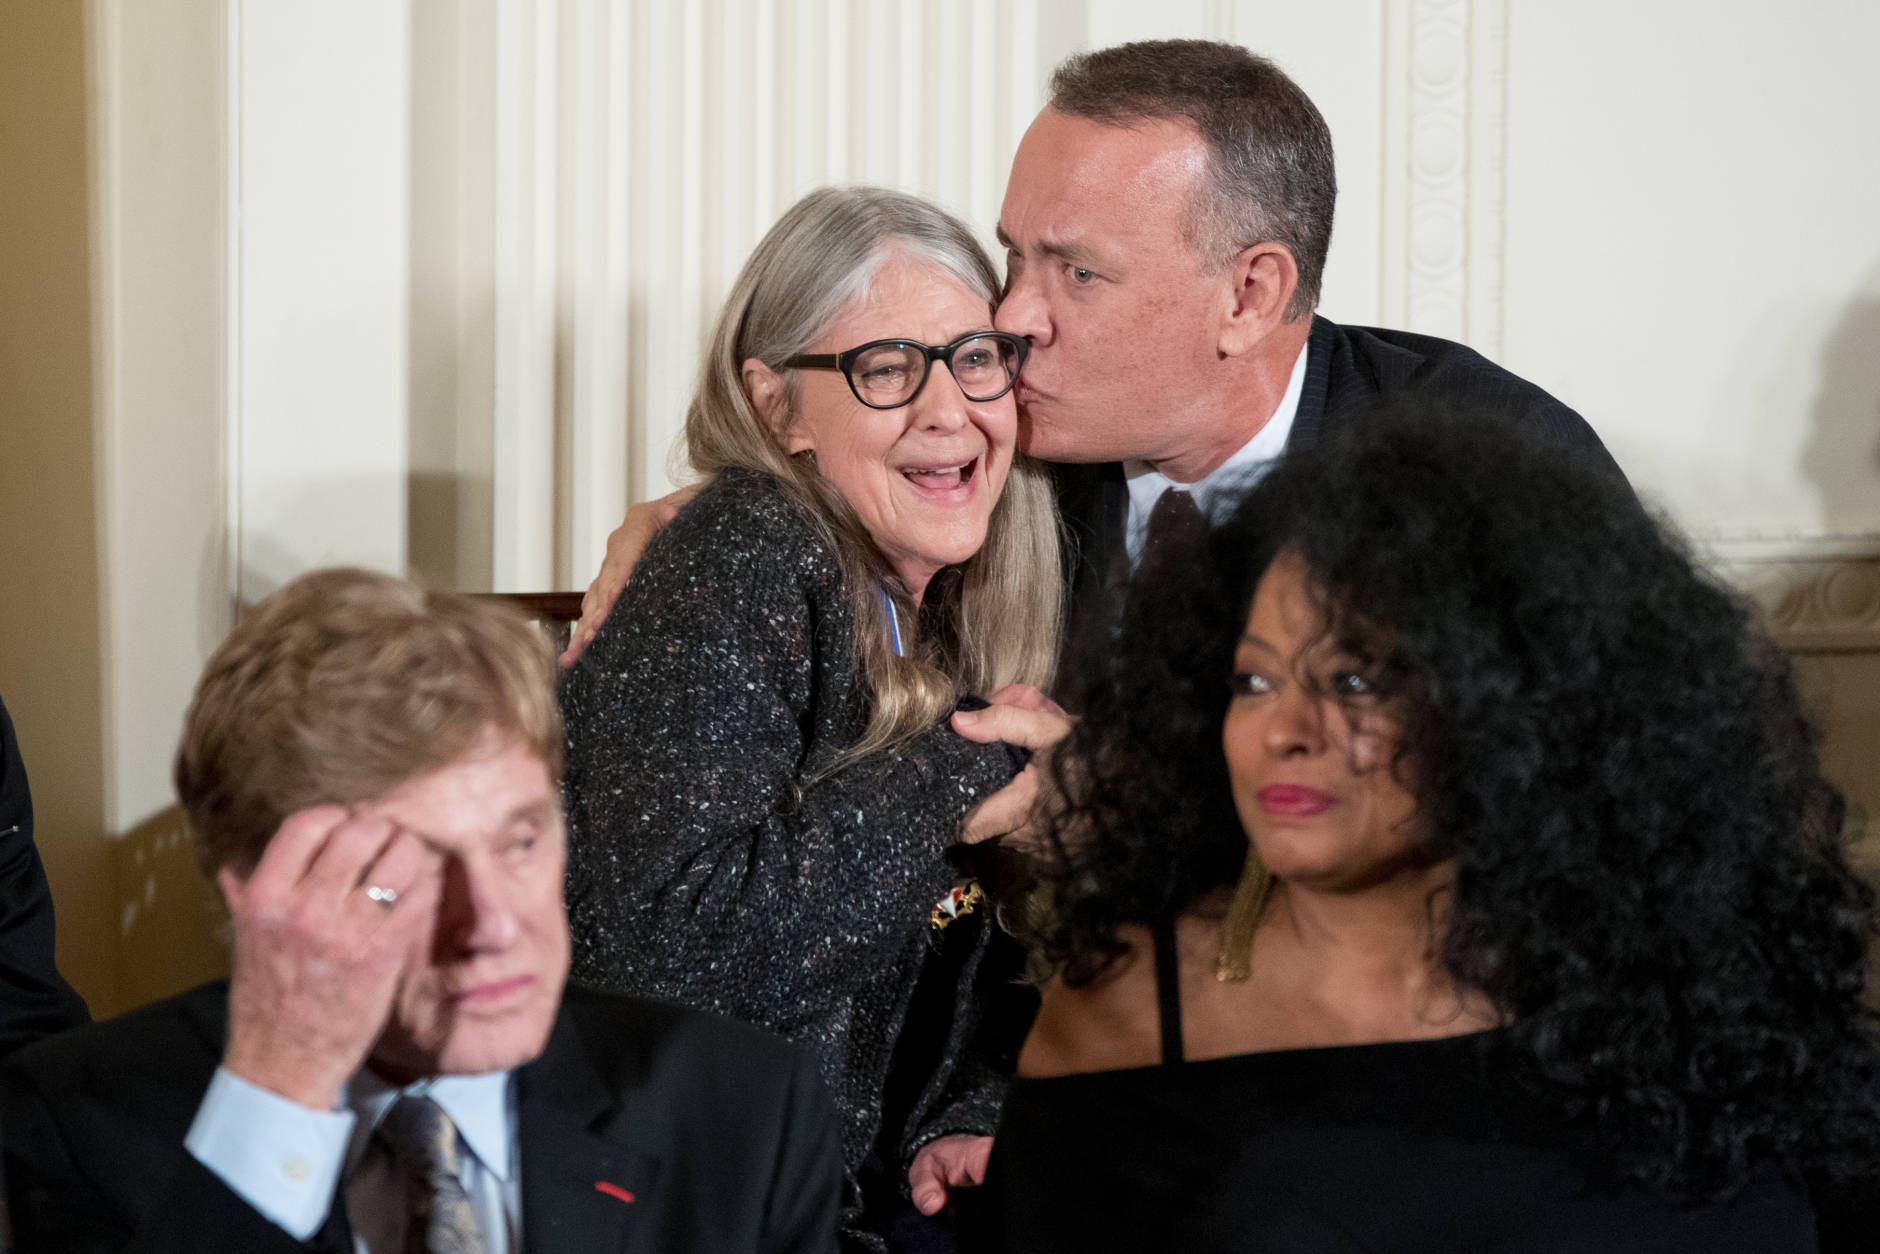 Mathematician and computer scientist Margaret Hamilton gets a kiss from actor Tom Hanks, right, after she receives the Presidential Medal of Freedom from President Barack Obama during a ceremony in the East Room of the White House, Tuesday, Nov. 22, 2016, in Washington. Obama is recognizing 21 Americans with the nation's highest civilian award, including giants of the entertainment industry, sports legends, activists and innovators. (AP Photo/Andrew Harnik)